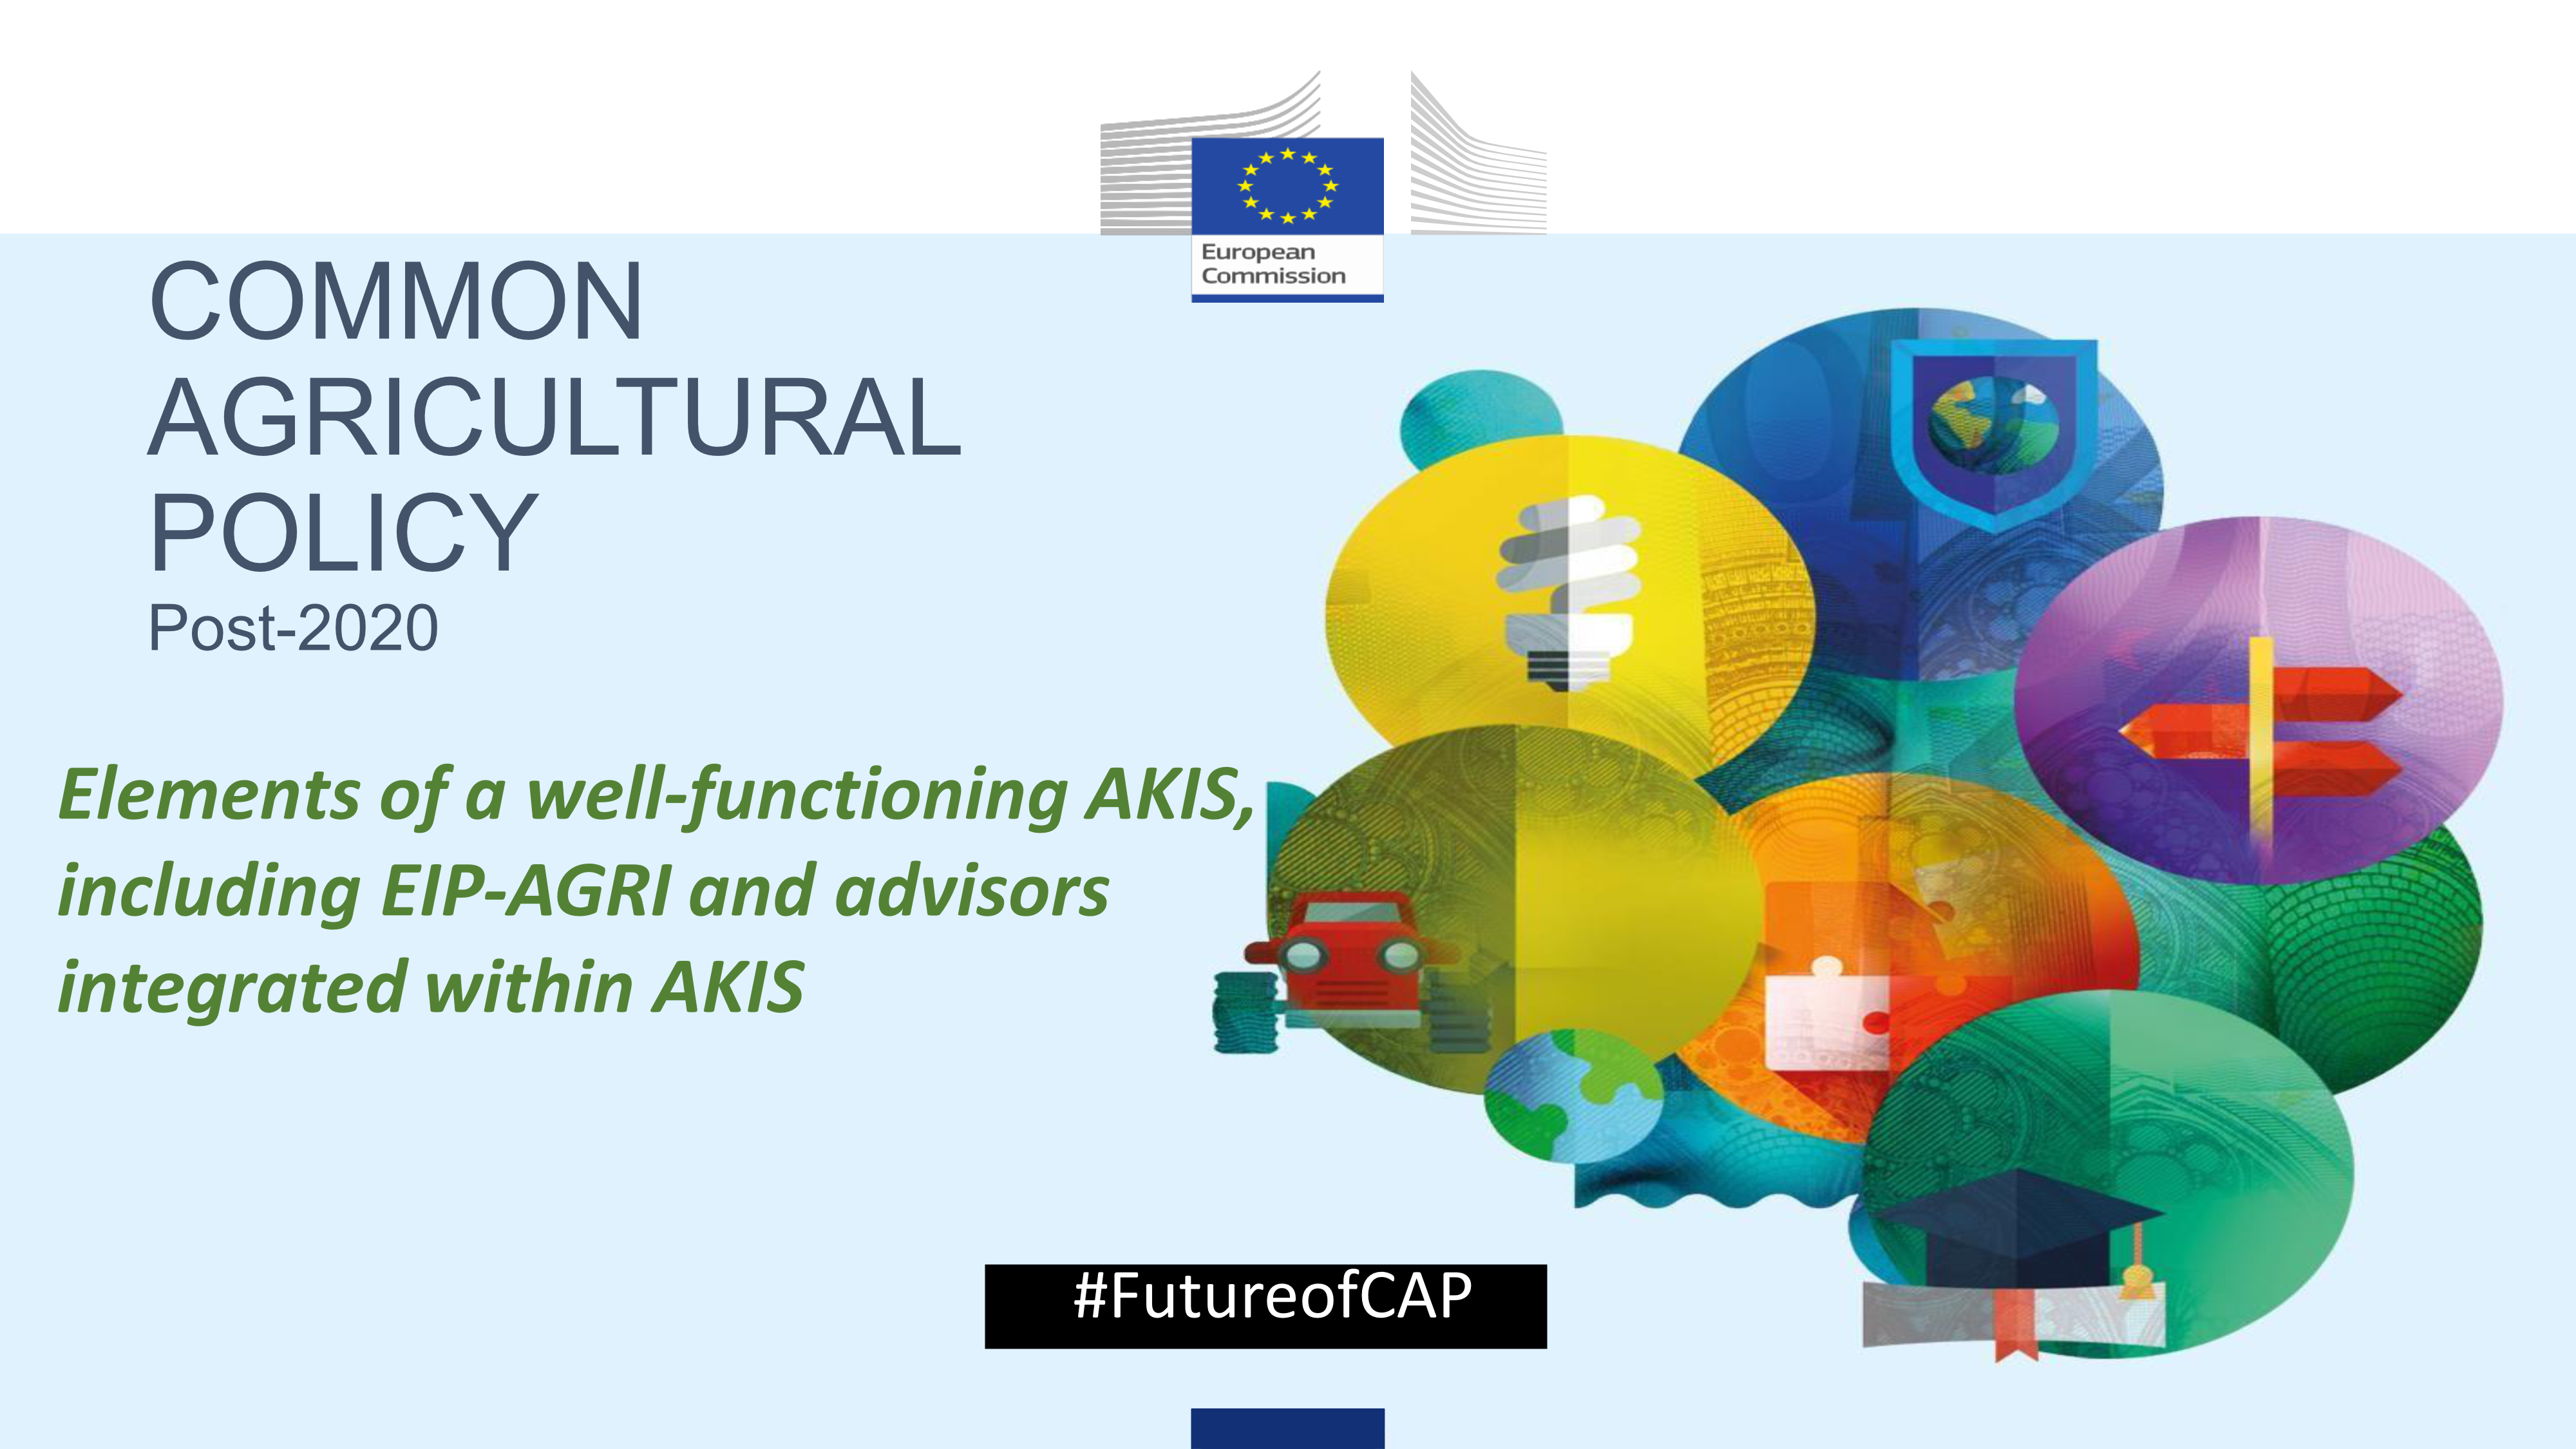 Common agricultural policy. Elements of a well- functioning AKIS, including EIP-AGRI and advisors integrated within AKIS.